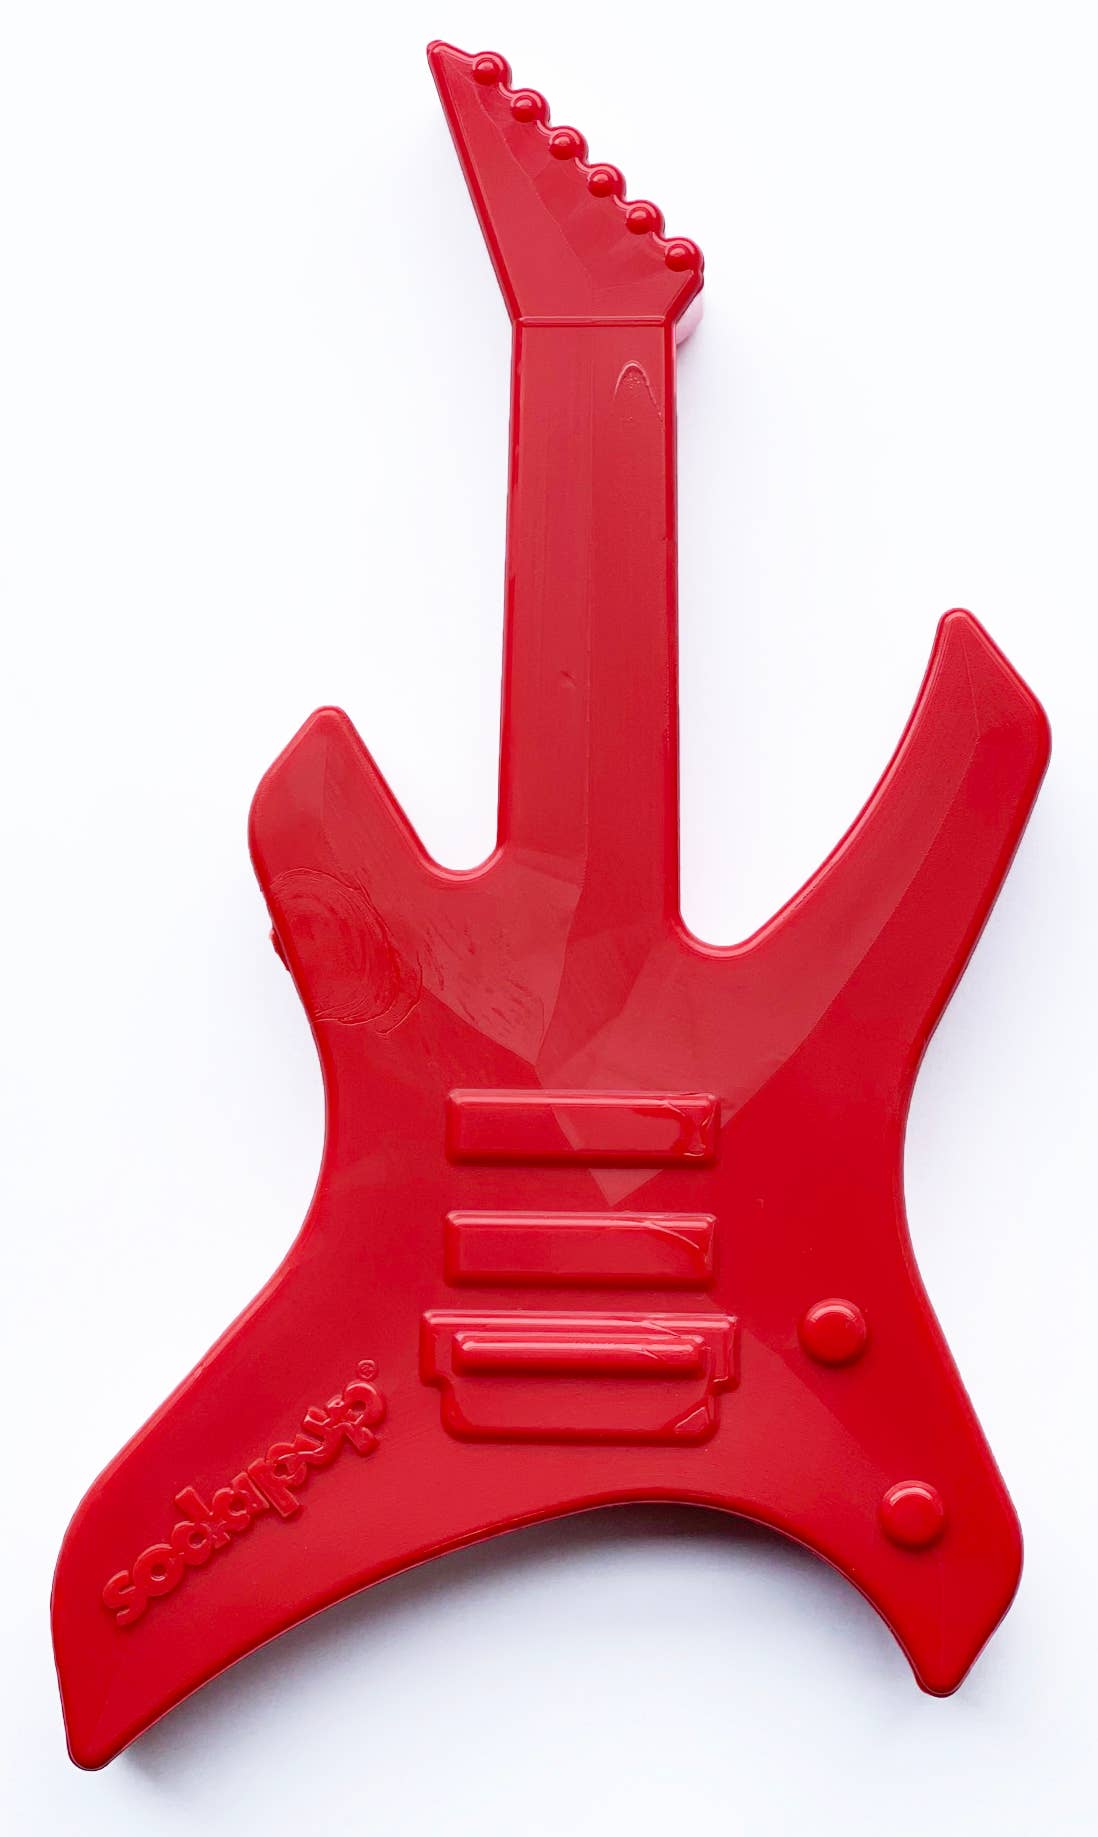 SodaPup Electric Guitar Power Chewer Toy  Image